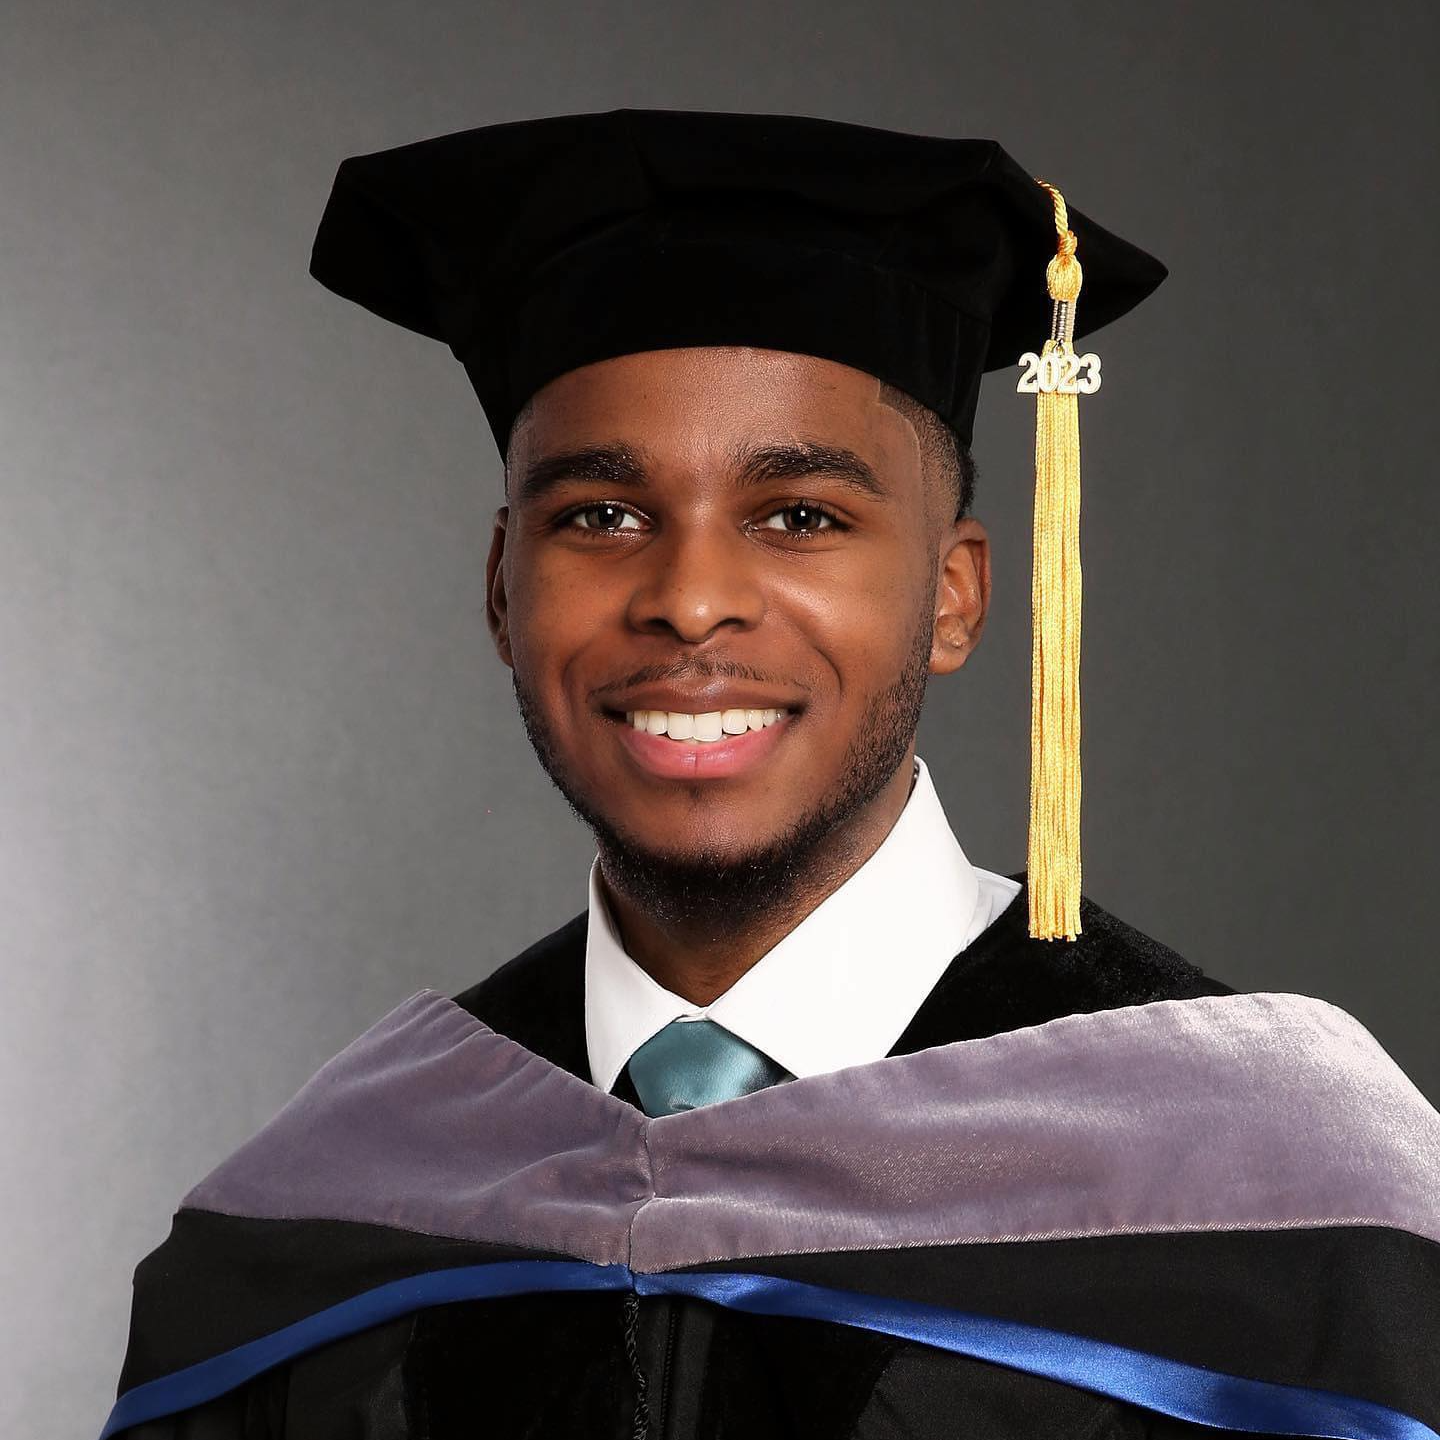 student in a cap and gown for doctorate degree